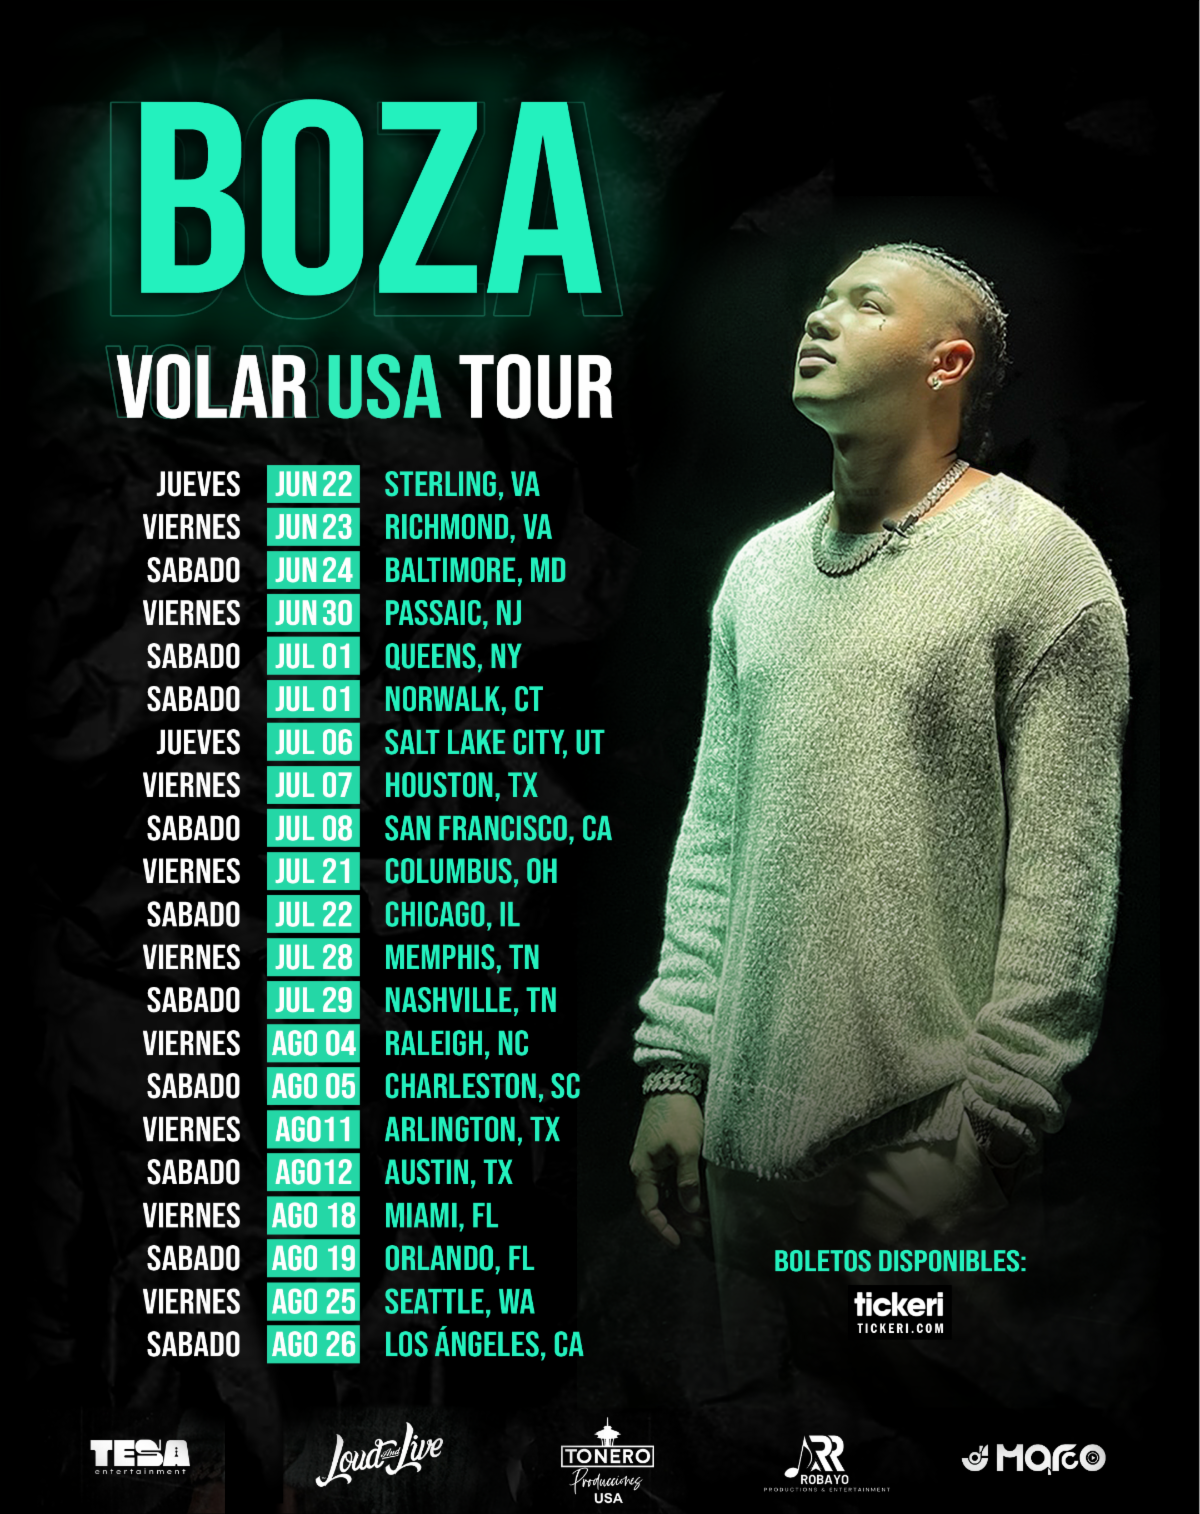 Boza concert schedule in the United States